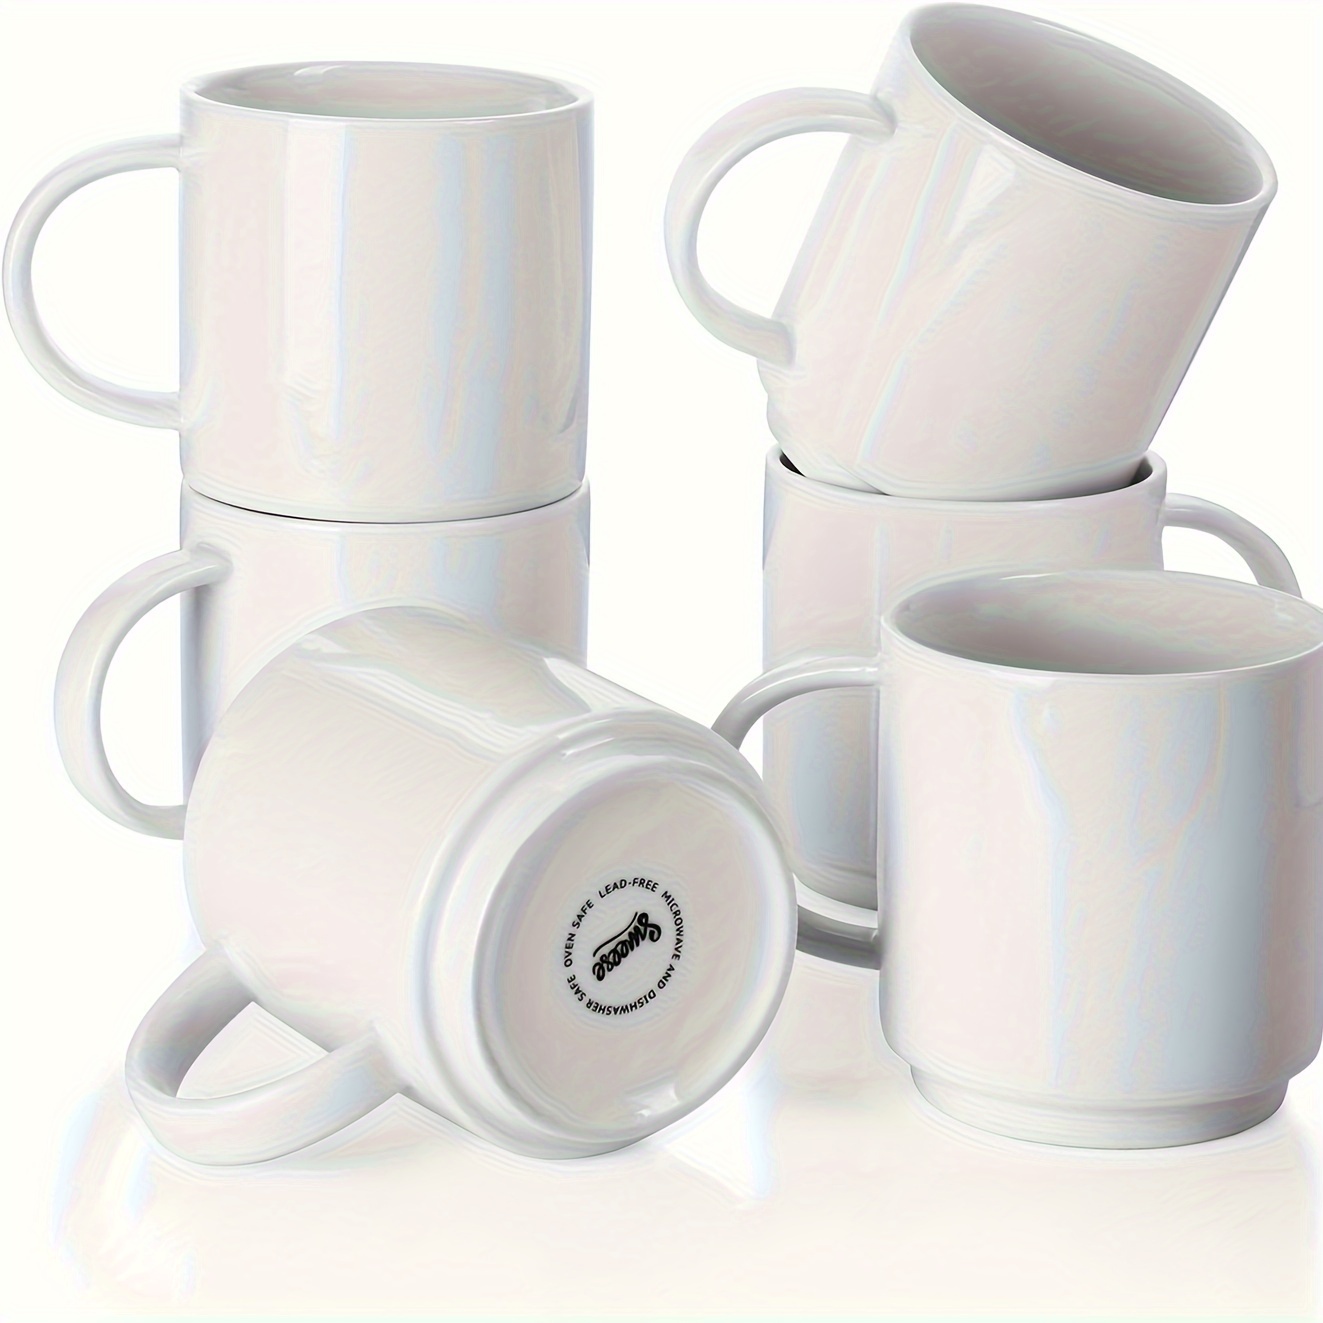 

10 Oz Stackable White Coffee Mug, Porcelain Coffee Mugs Sets Of 6, Coffee Cups With Handle For Specialty Coffee Drinks, Cappuccino, Cafe Mocha, Latte And Tea